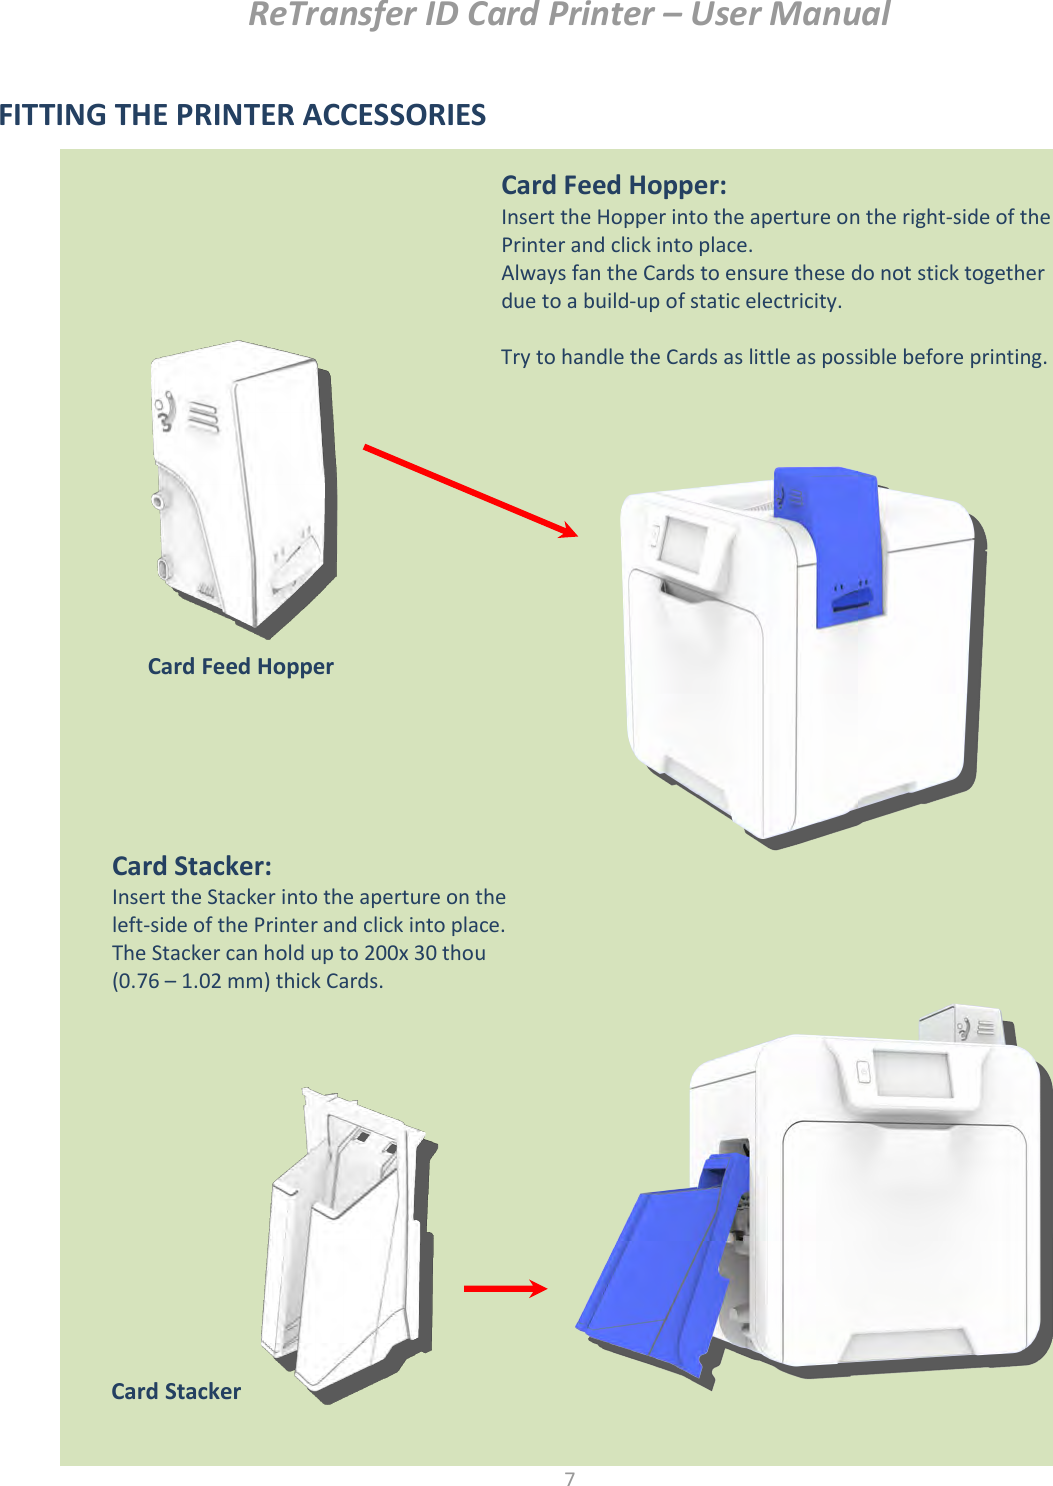 ReTransfer ID Card Printer – User Manual  7  FITTING THE PRINTER ACCESSORIES                           Card Feed Hopper: Insert the Hopper into the aperture on the right-side of the Printer and click into place. Always fan the Cards to ensure these do not stick together due to a build-up of static electricity.  Try to handle the Cards as little as possible before printing. Card Stacker: Insert the Stacker into the aperture on the left-side of the Printer and click into place. The Stacker can hold up to 200x 30 thou (0.76 – 1.02 mm) thick Cards.  Card Stacker  Card Feed Hopper  